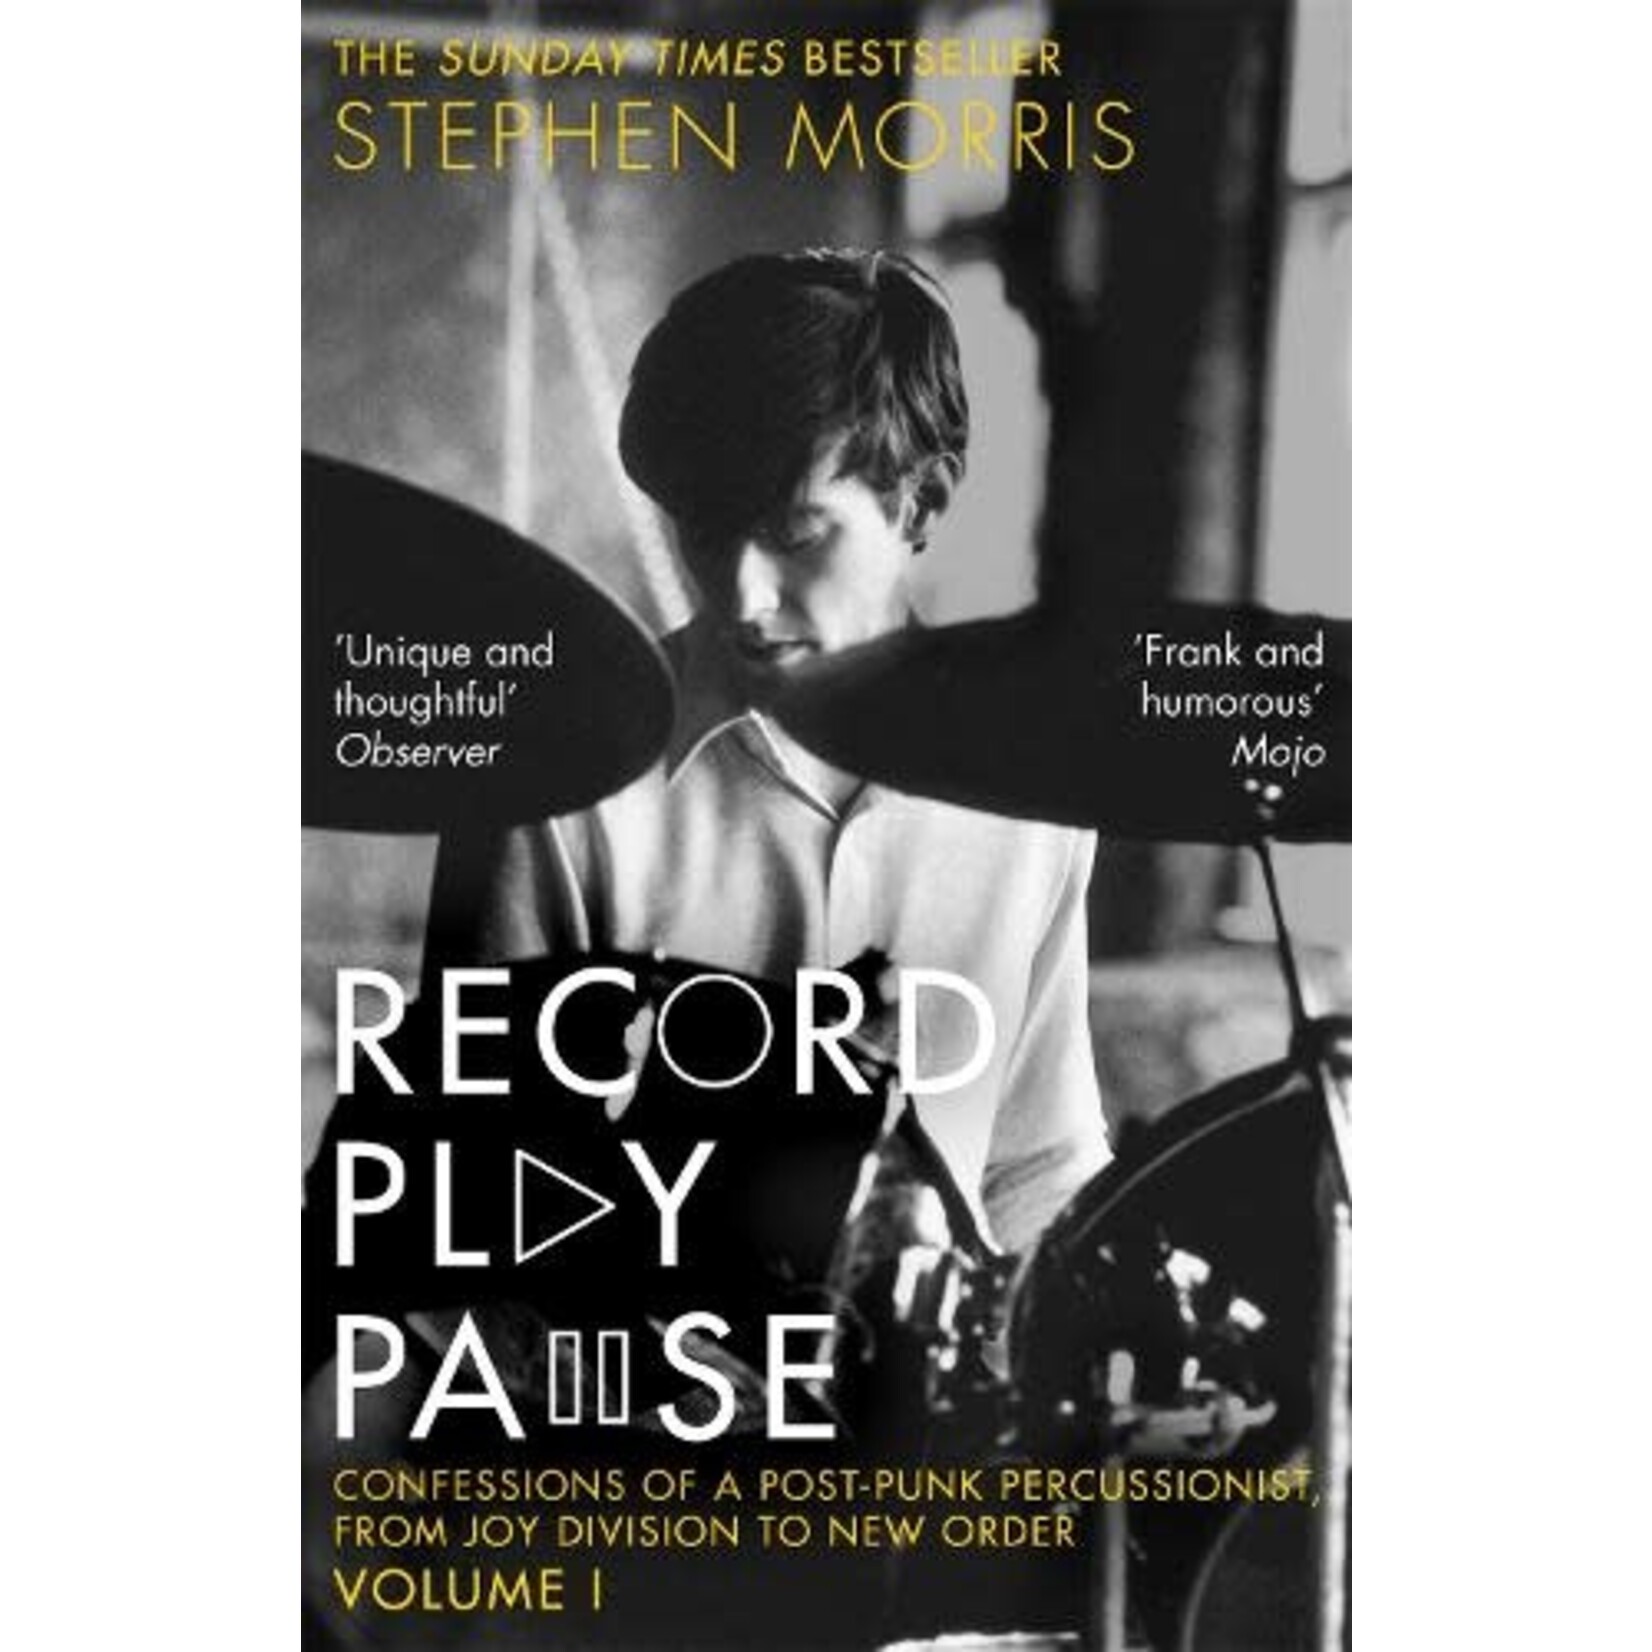 Stephen Morris (Joy Division/New Order) - Record Play Pause: Confessions Of A Post-Punk Percussionist, From Joy Division To New Order Volume I [Book]